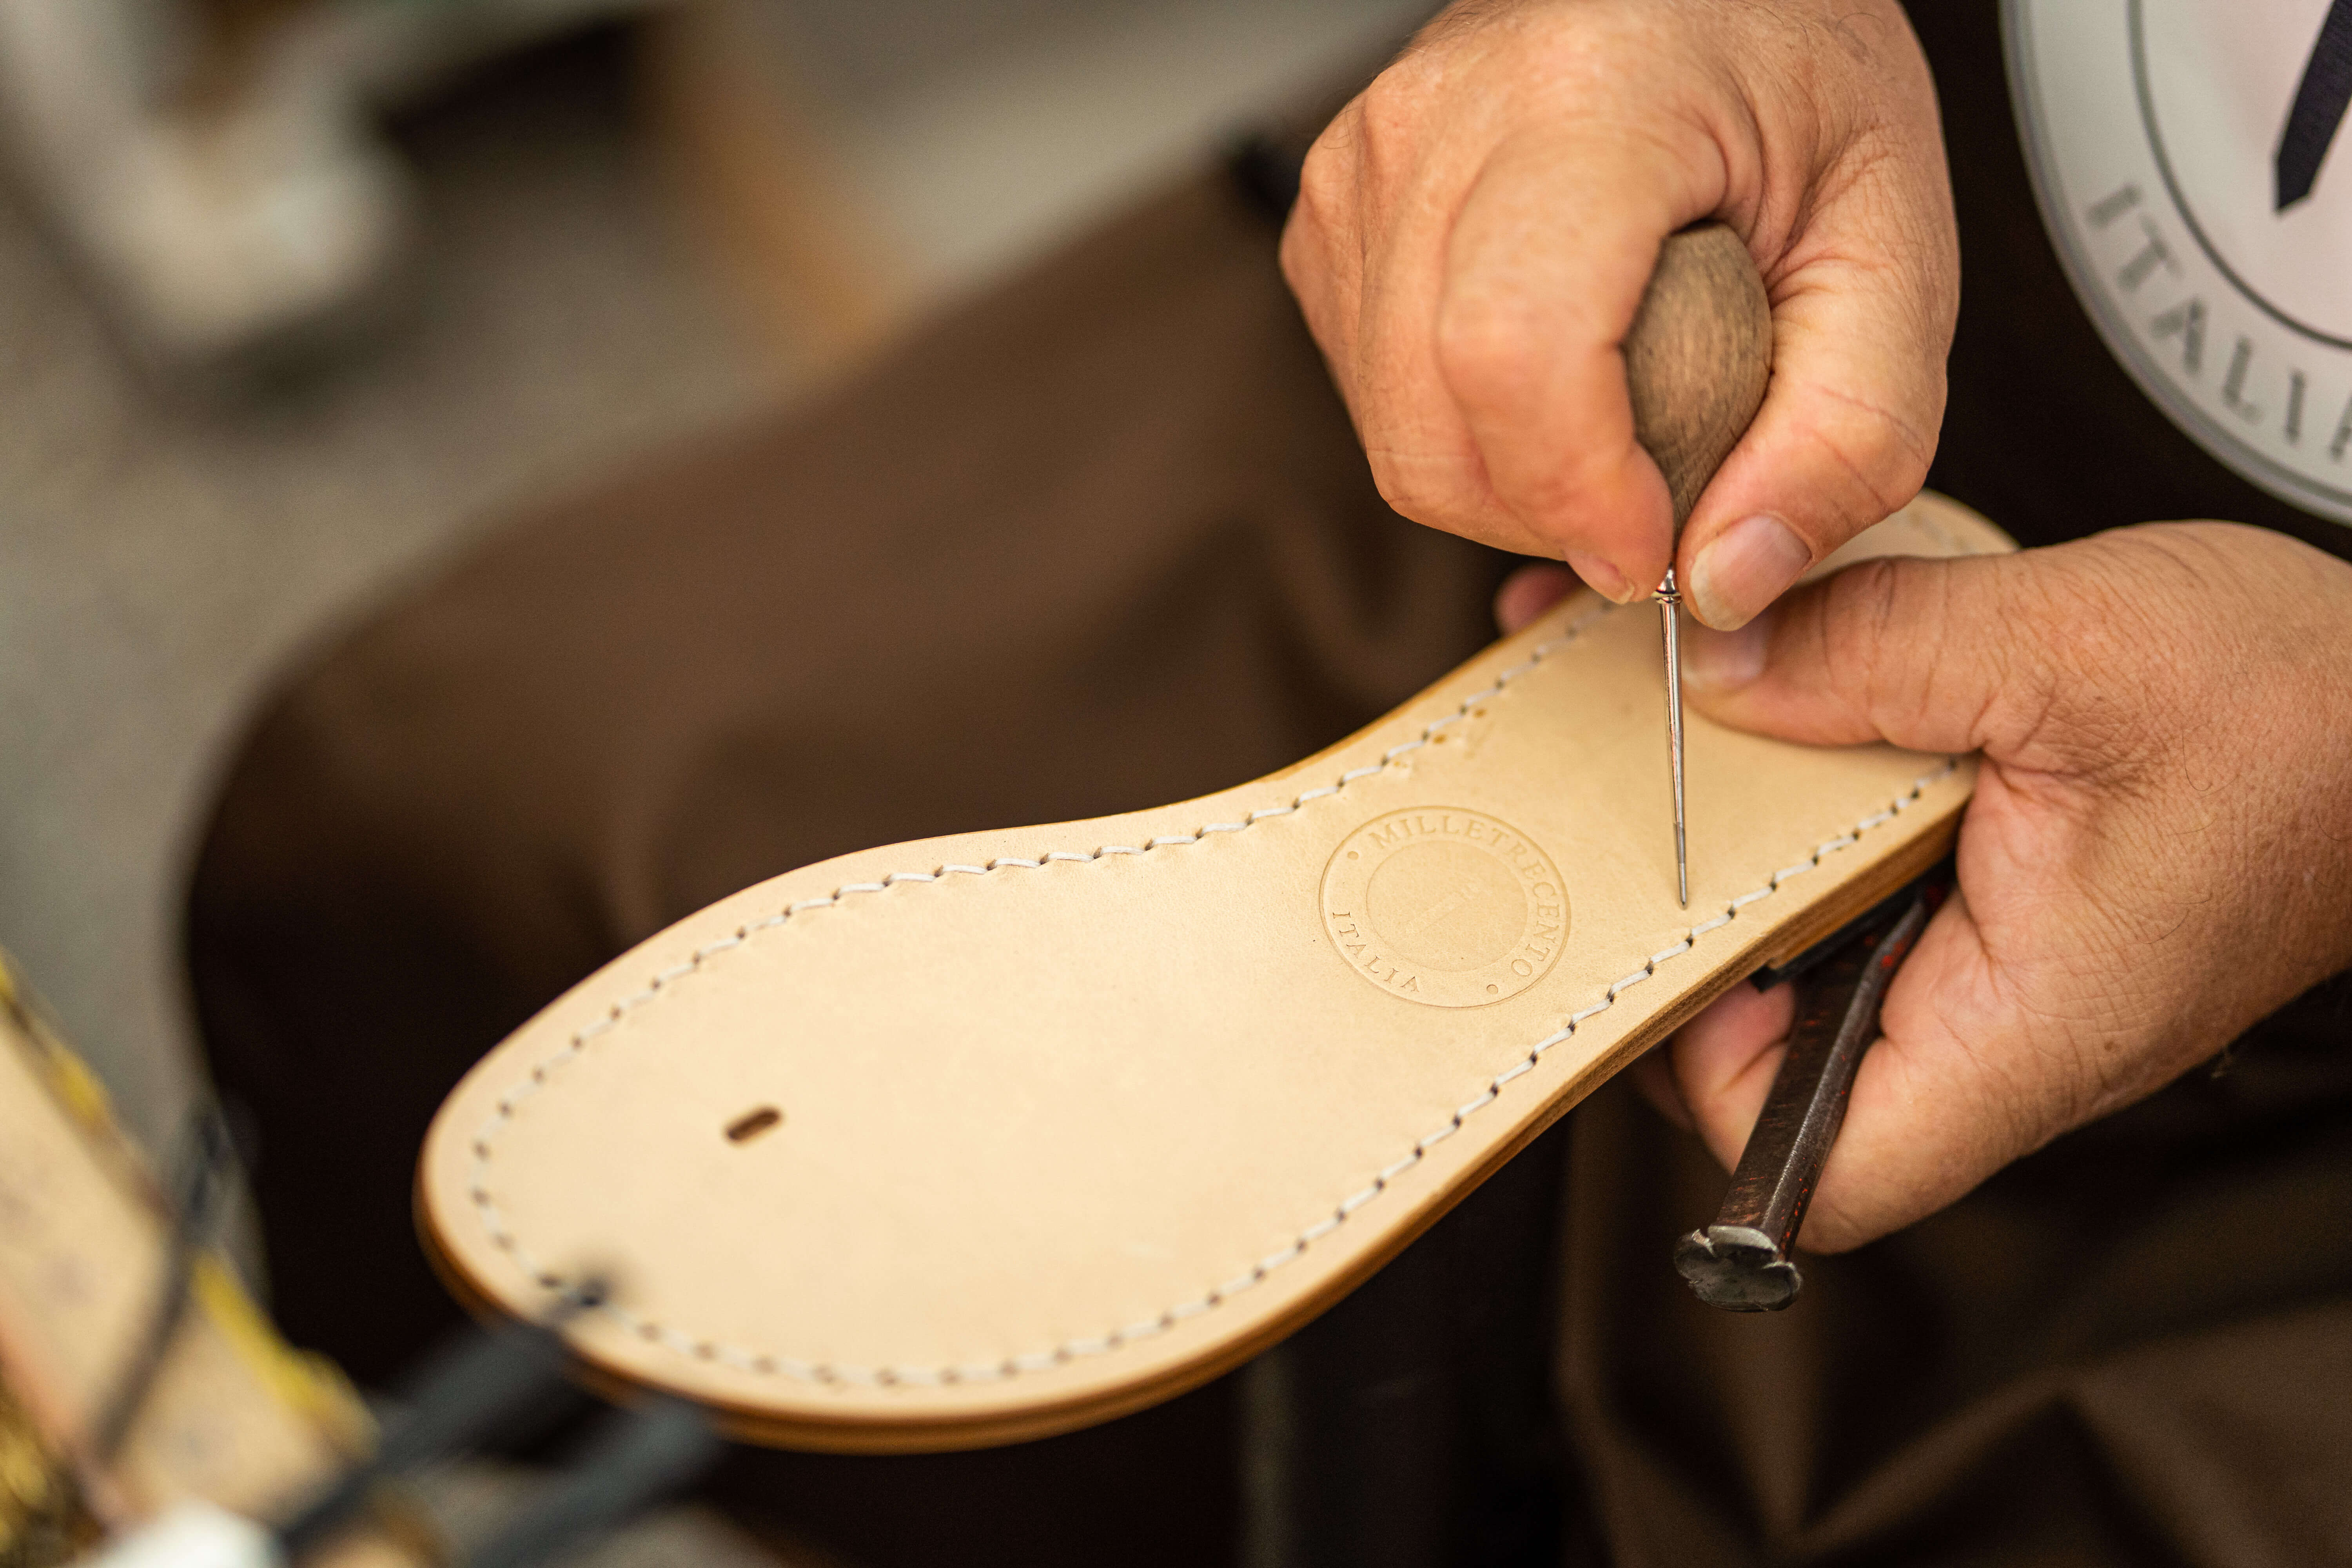 Handmade sandals made in Italy 